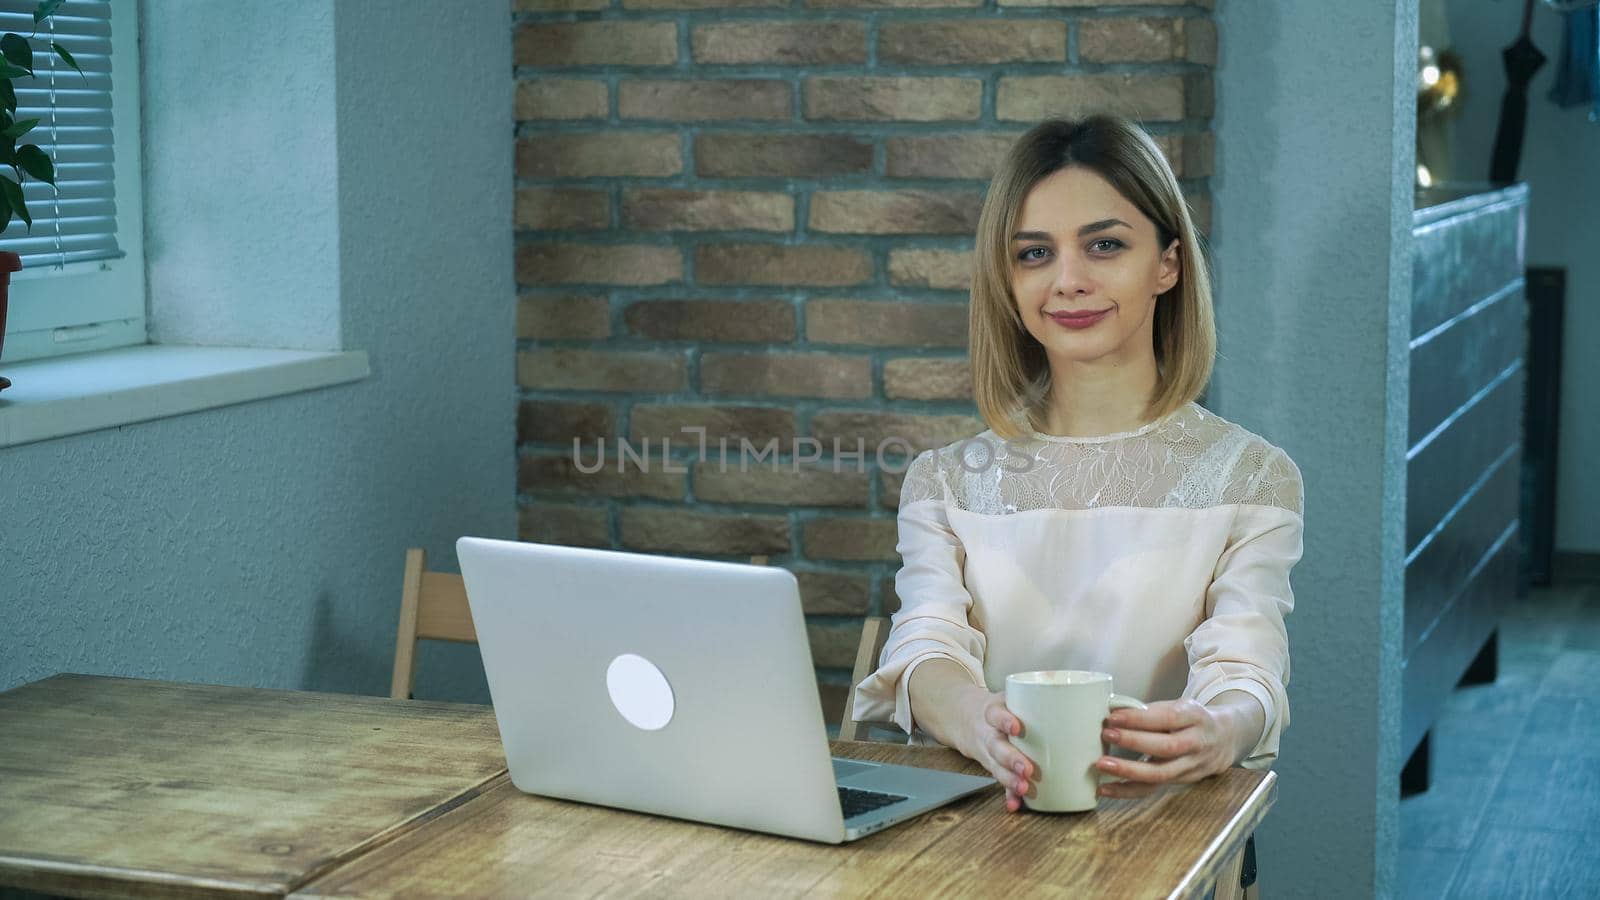 Young girl sitting in a cafe, at the computer, typing on the keyboard, drinking coffee, wearing a white blouse.